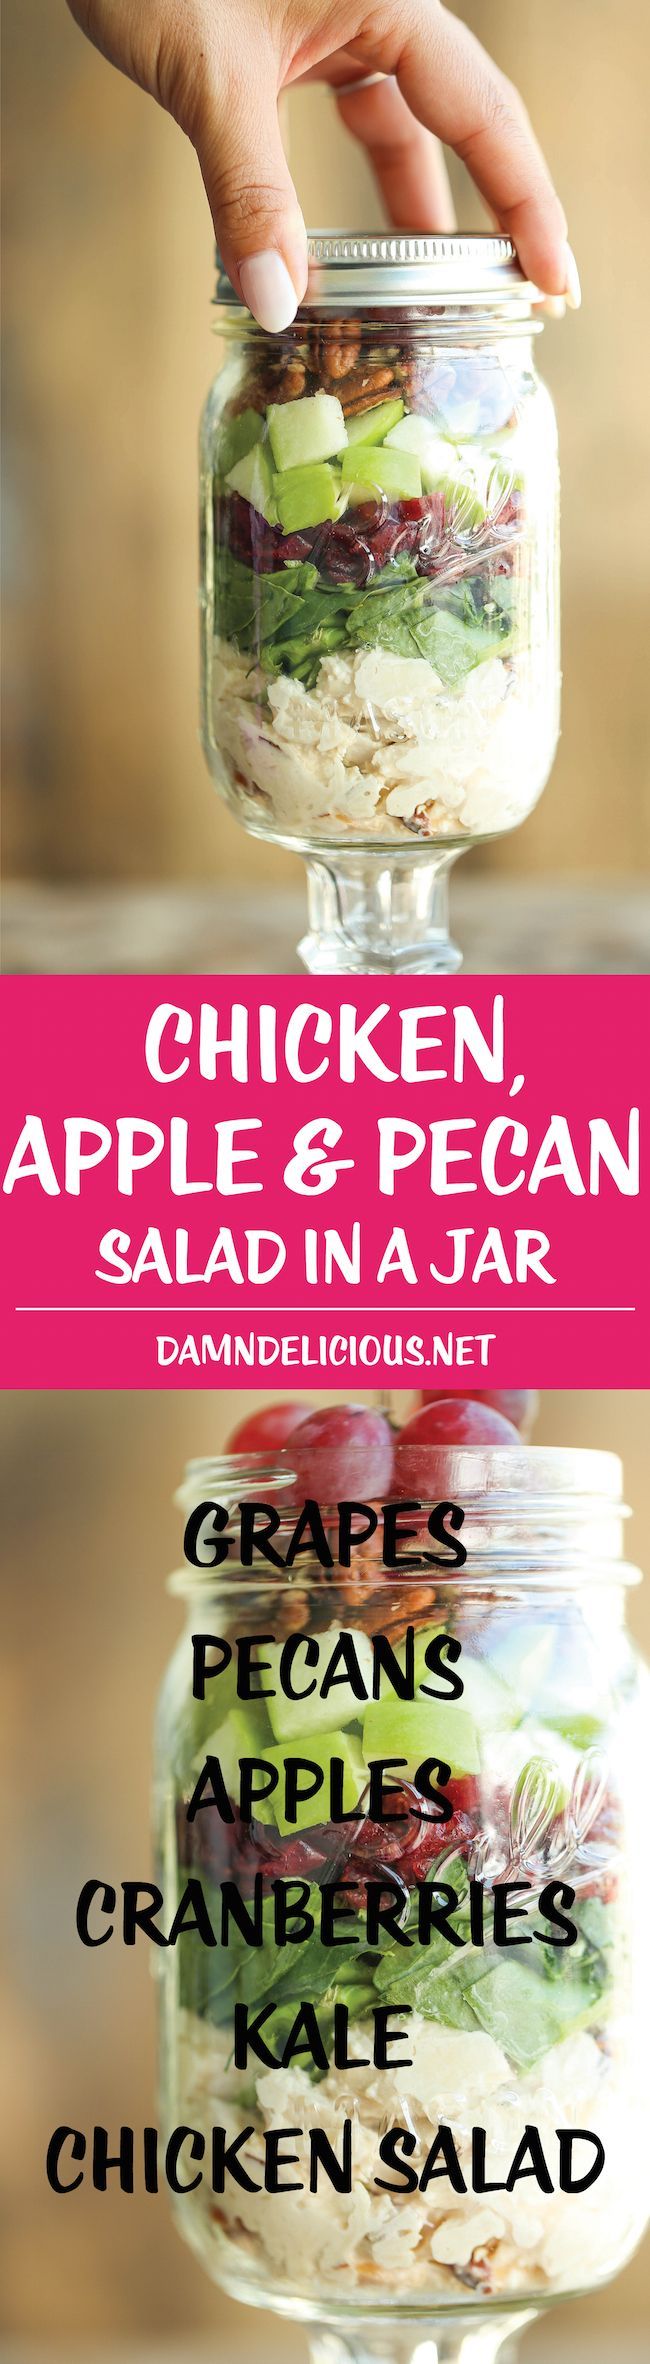 Chicken, Apple and Pecan Salad in a Jar – Easy, portable salads that can be made ahead for the week – they stay fresh so you never